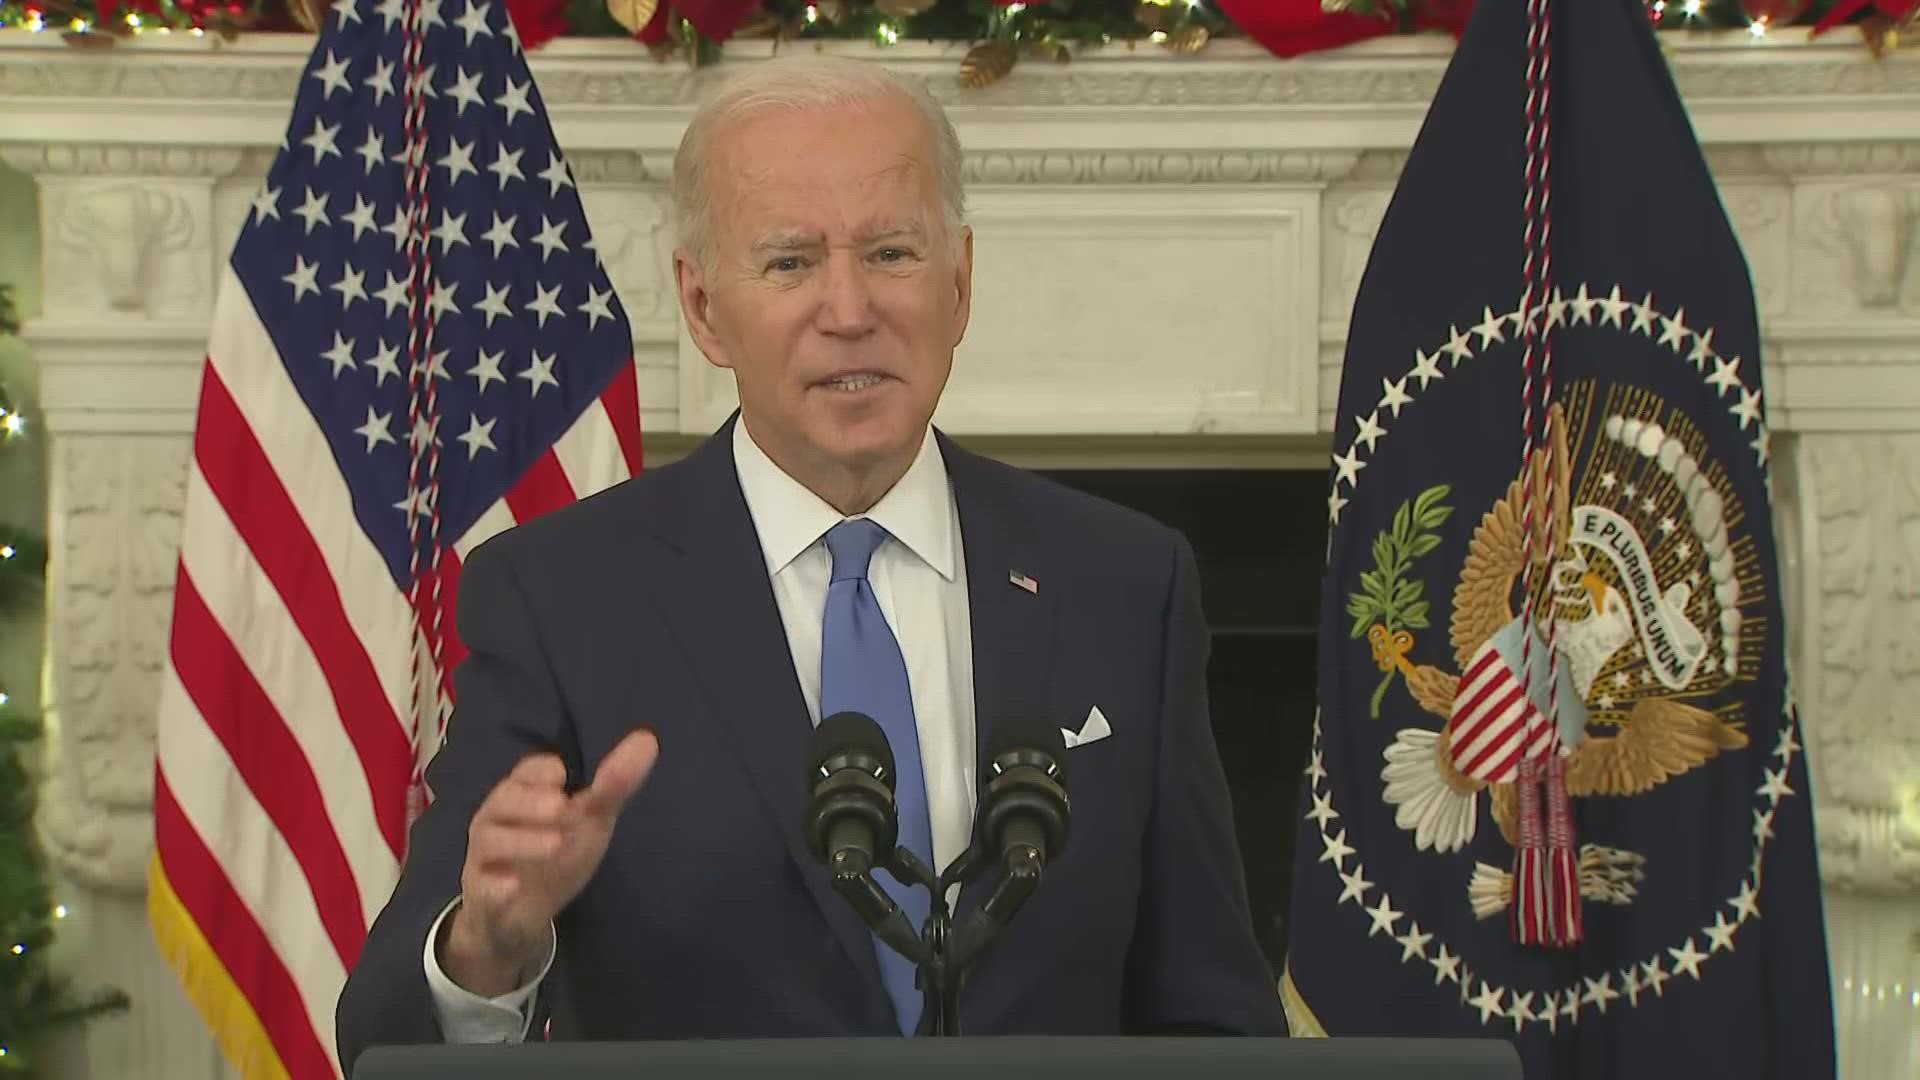 Biden said vaccination mandates are unpopular but will save lives and keep schools open. He urged schools to also follow CDC guidelines.